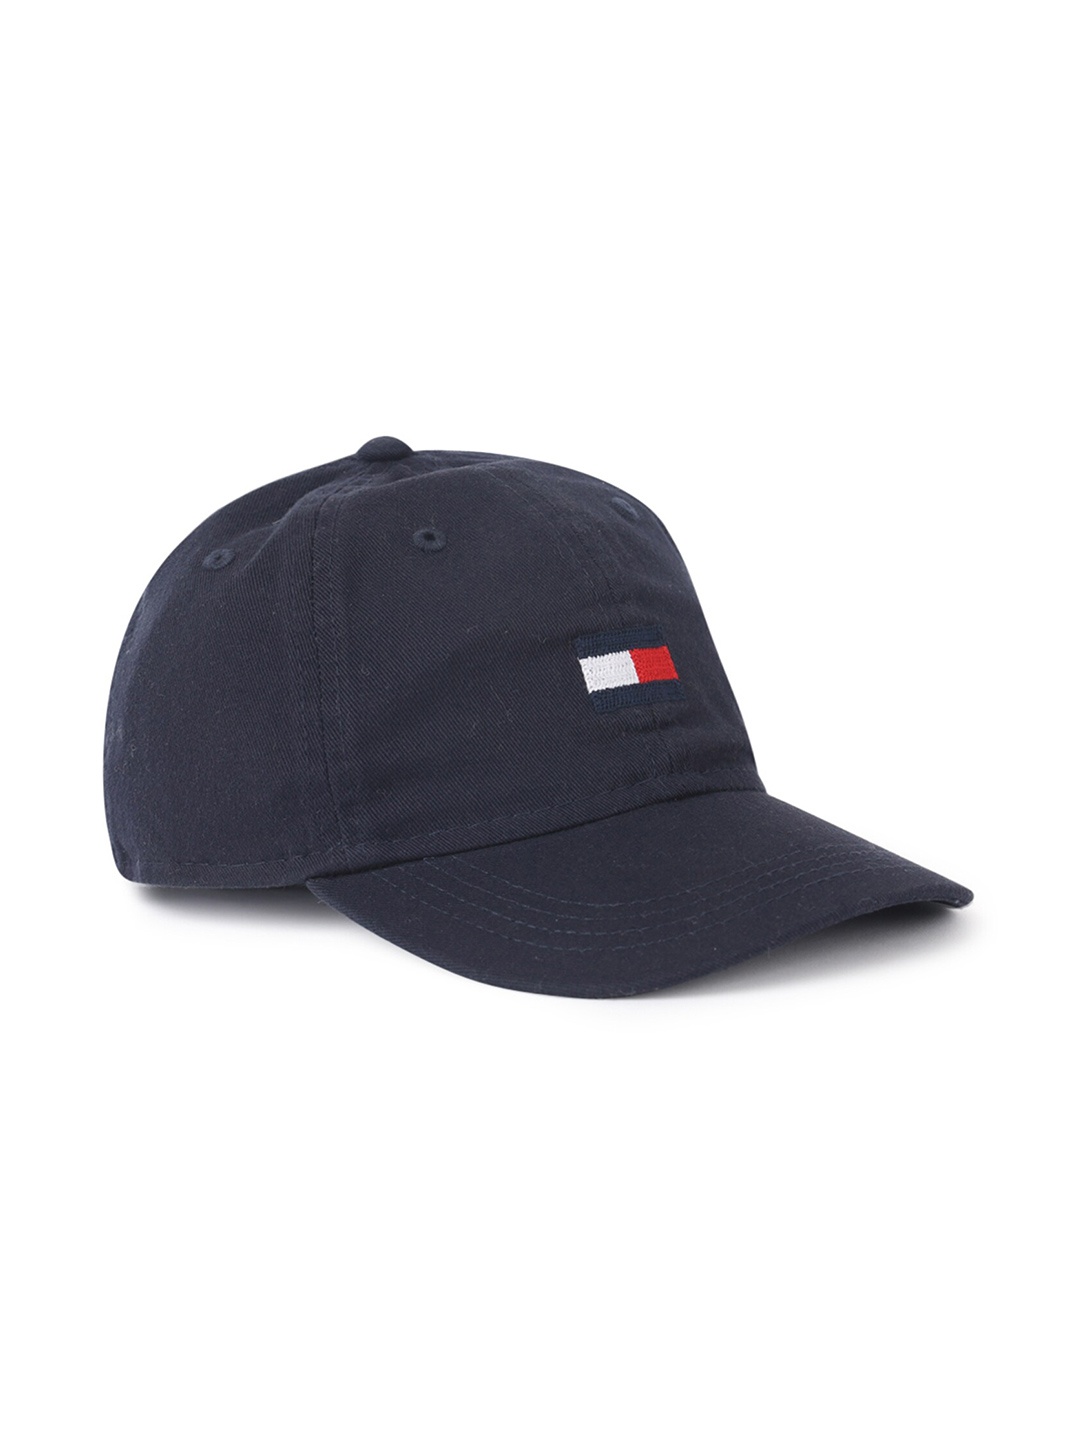 

Tommy Hilfiger Boys Embroidered Cotton Baseball Cap, Navy blue